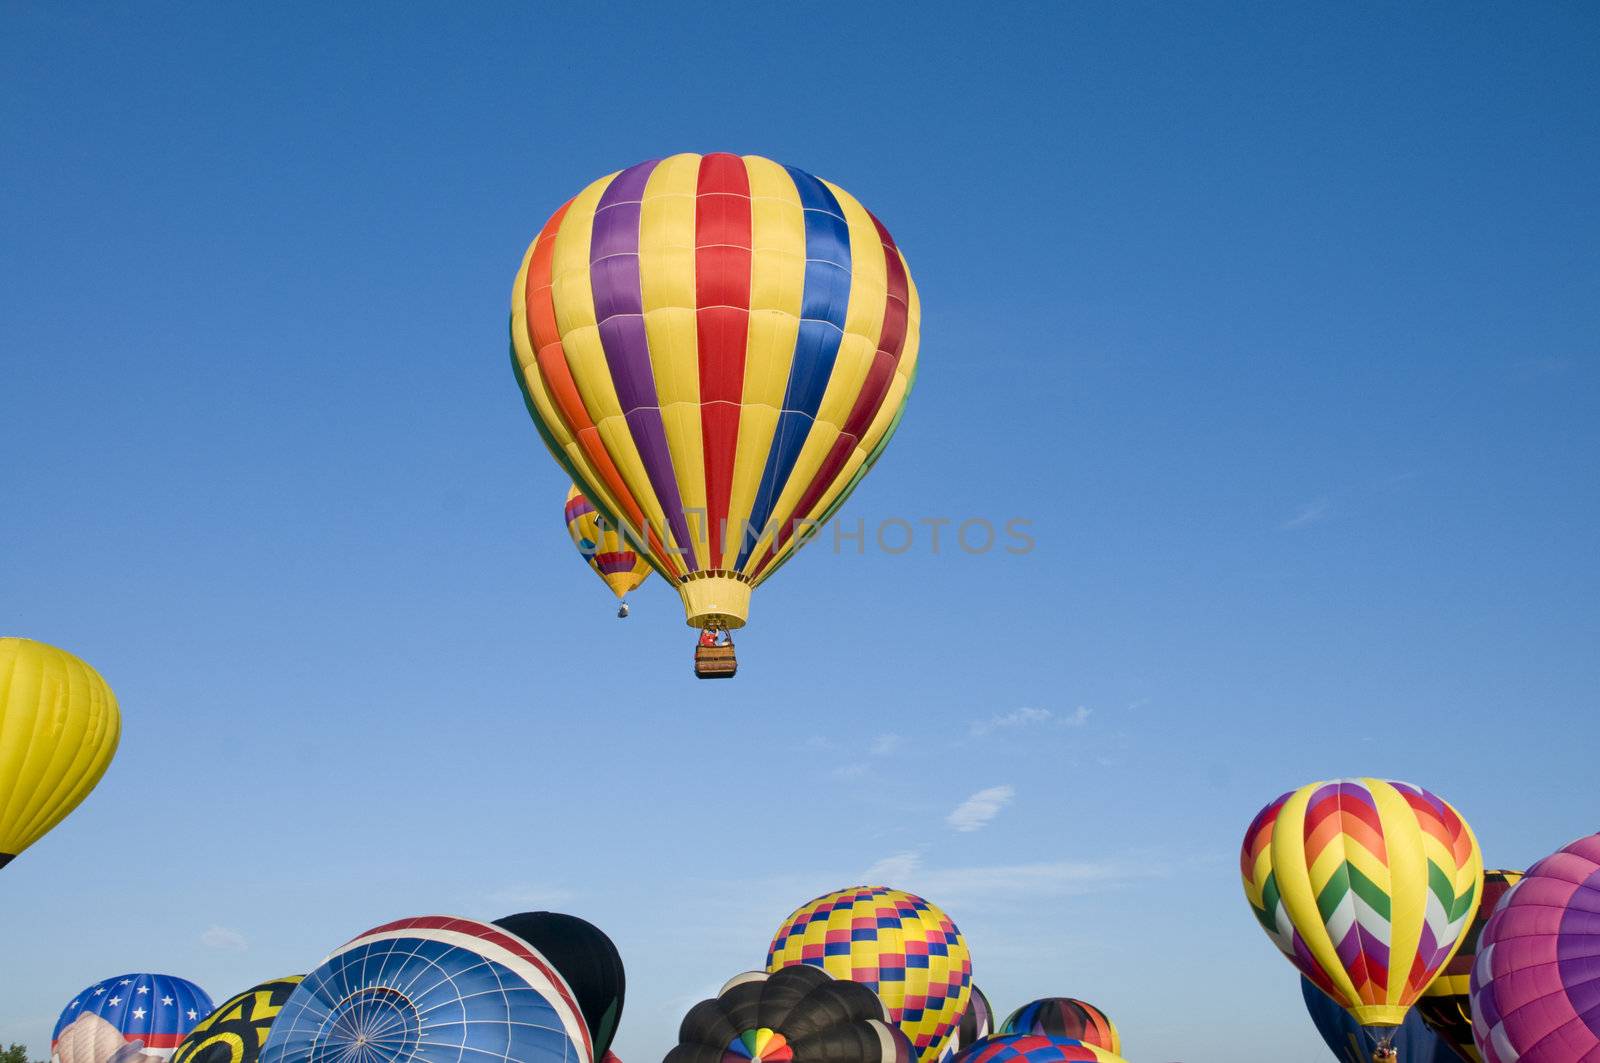 Hot-air balloons ascending over inflating ones on the ground